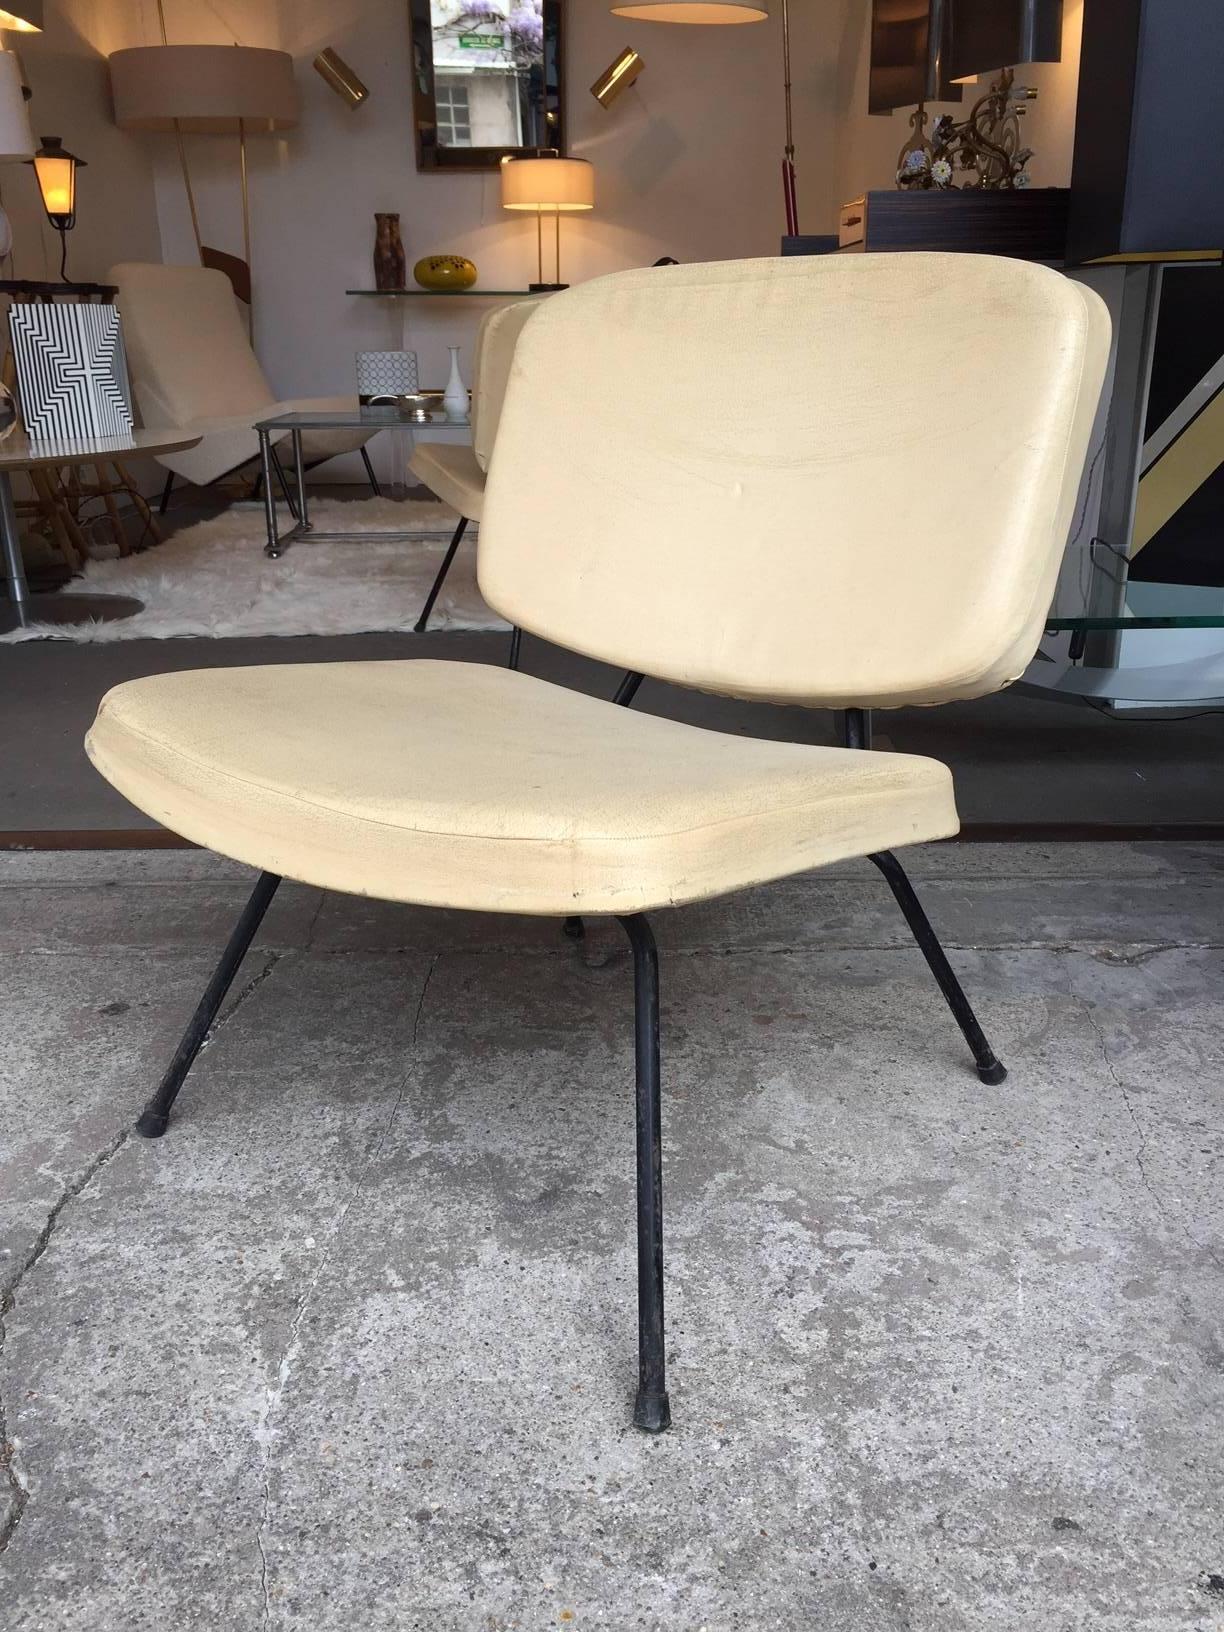 Pair of low chairs, CM190 design by Pierre Paulin fo Thonet Editions.
Condition as is, great design.